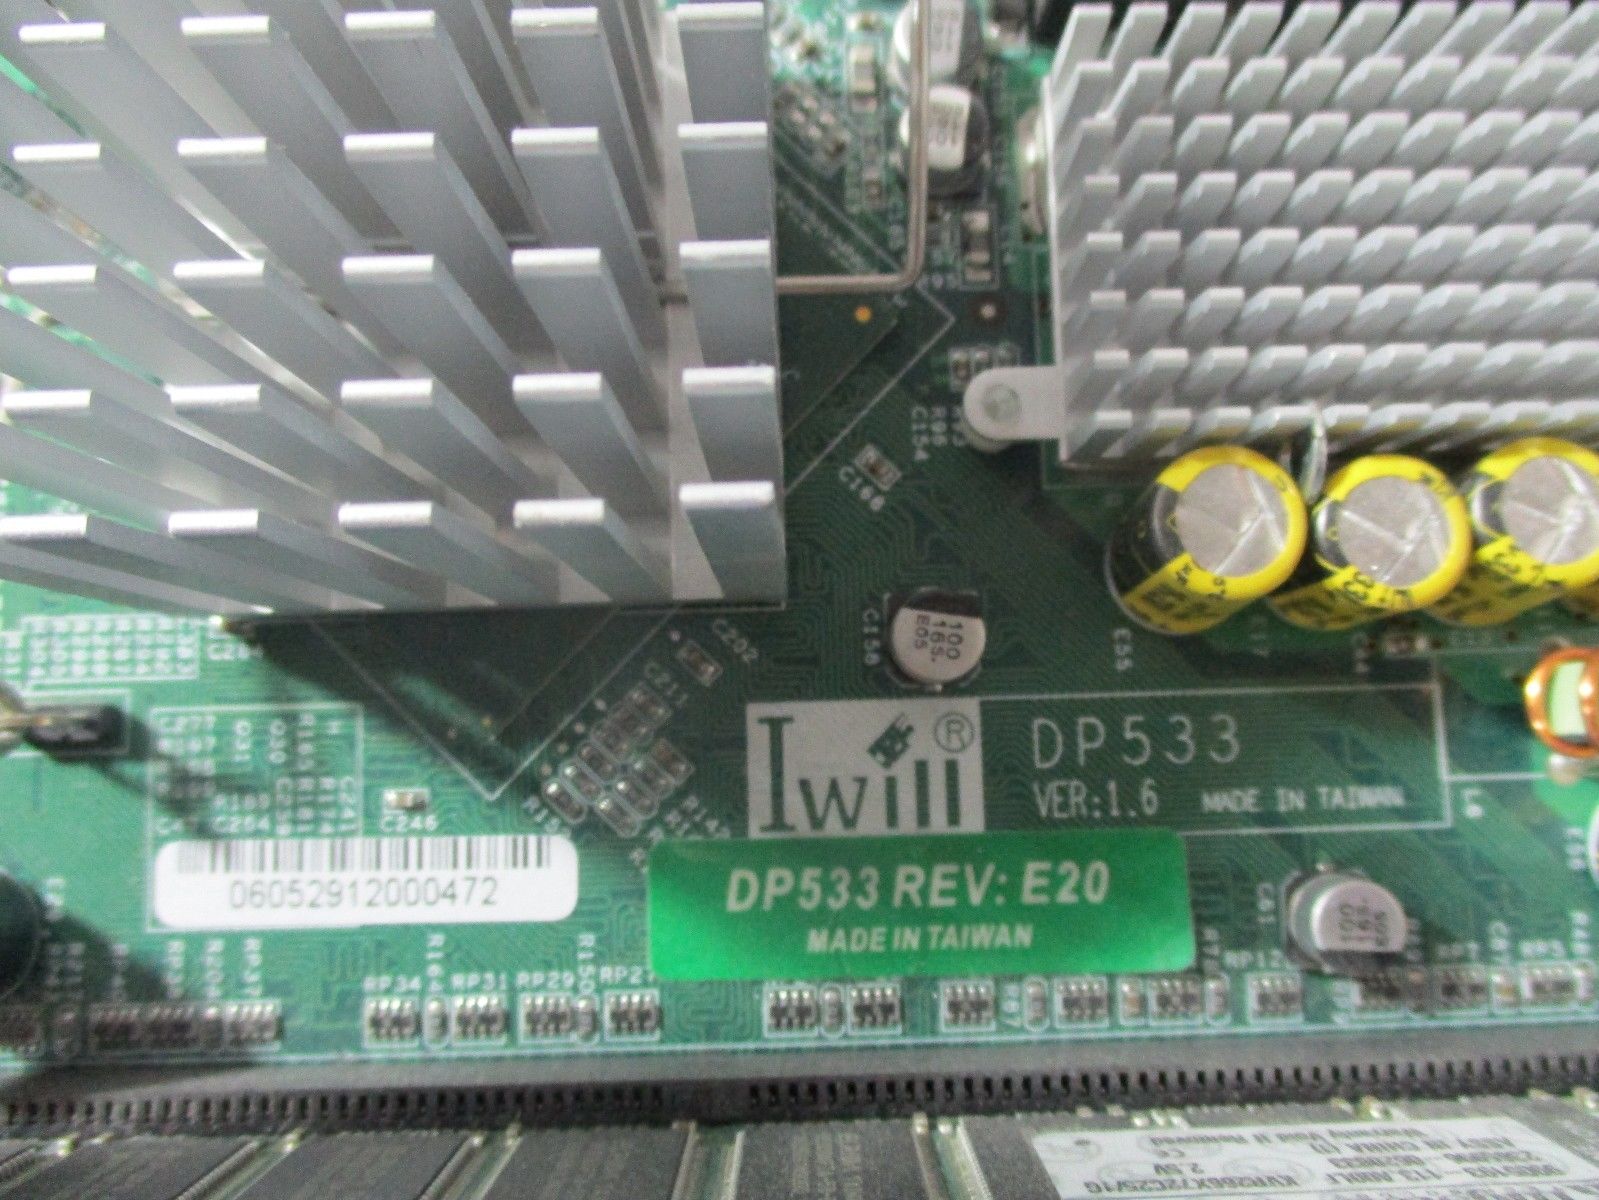 a close up of a computer motherboard with many wires